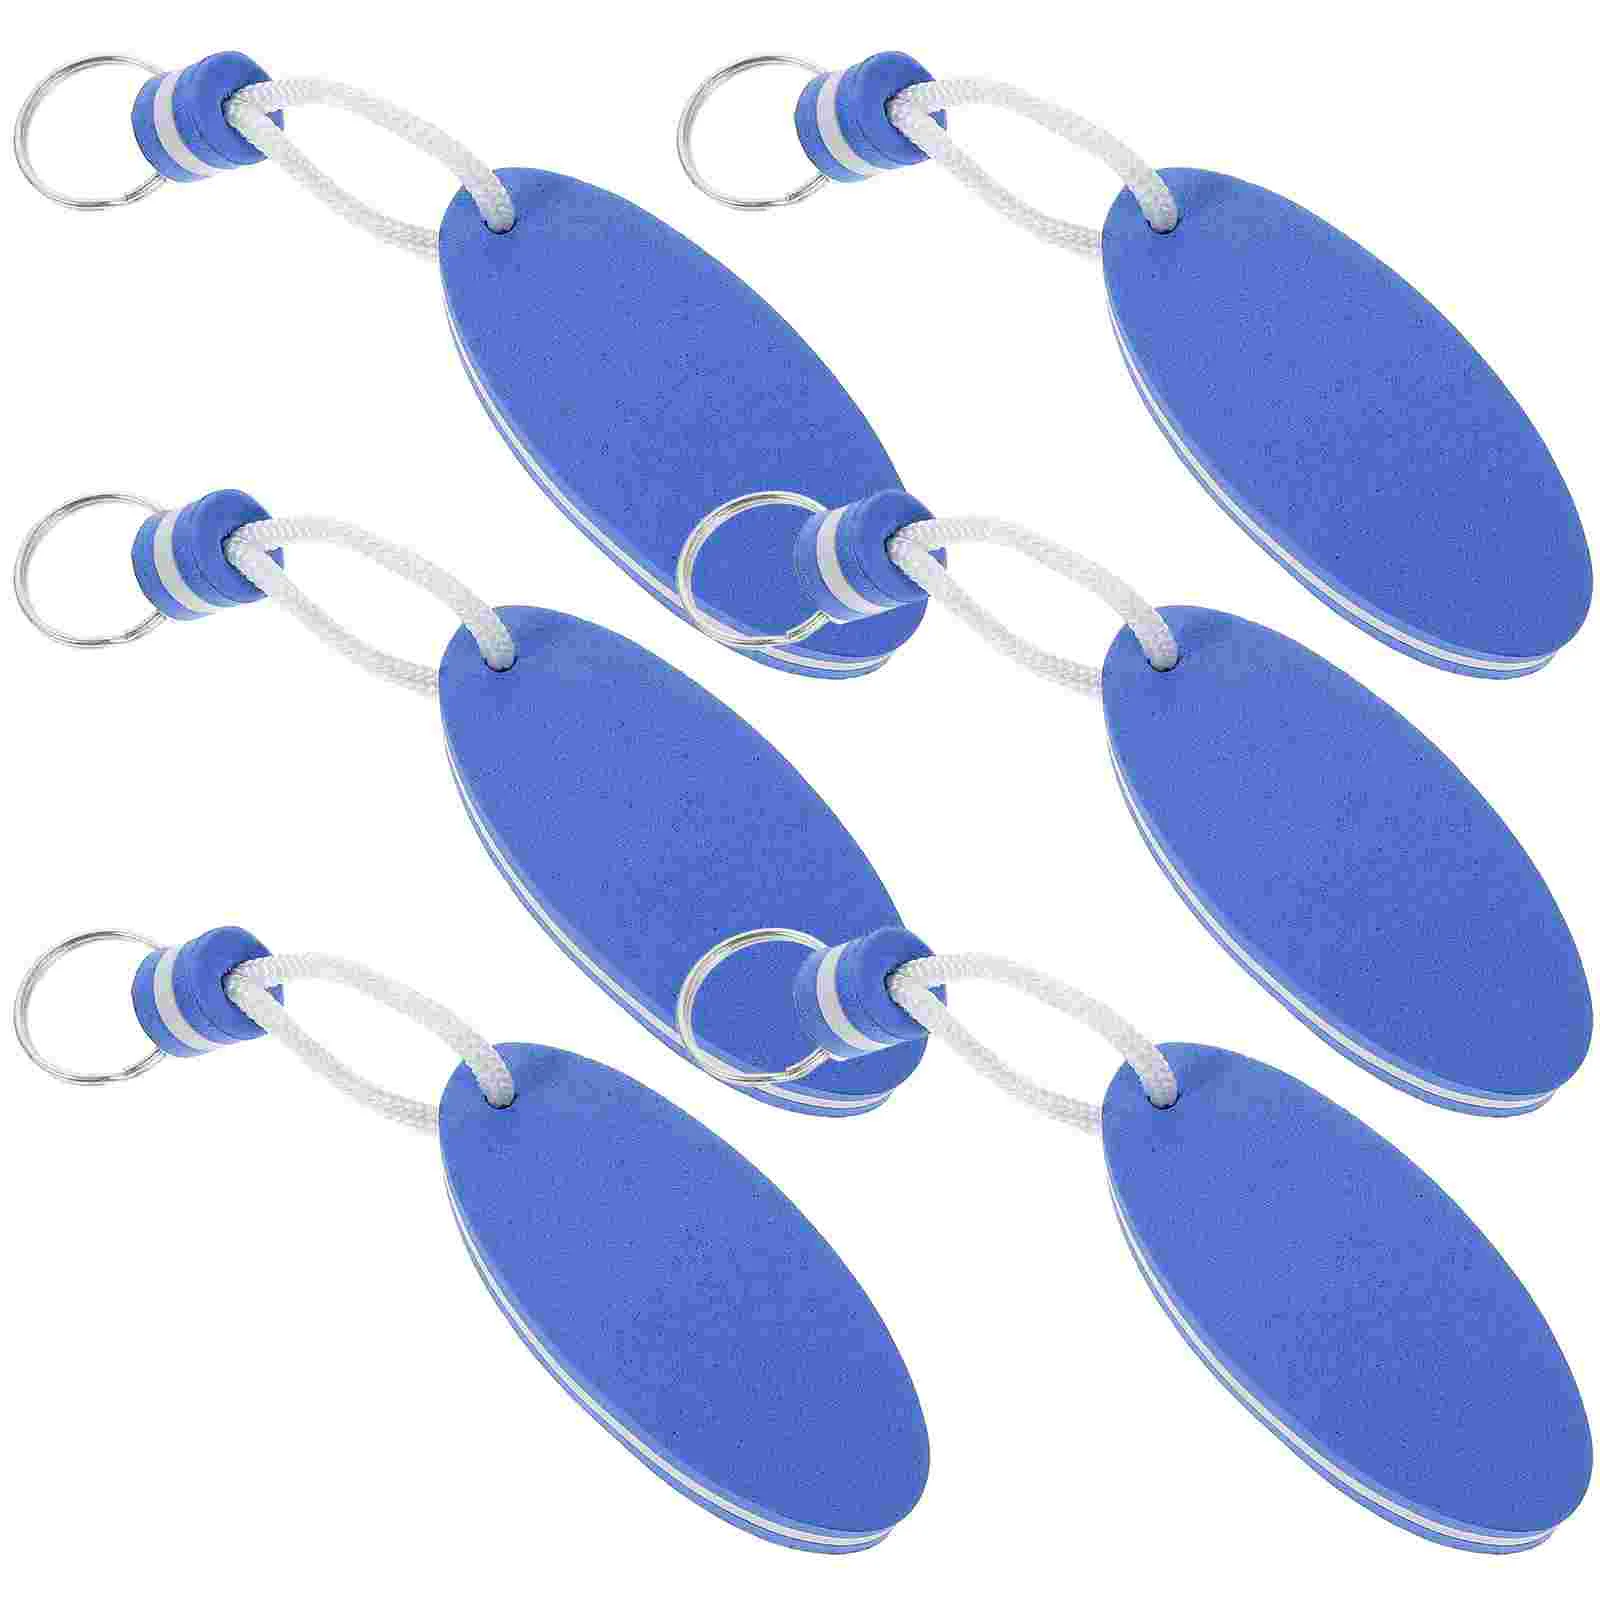 

6 Pcs Small Water Floating Keychains Mens Sponge Surfing Boating Must Haves Eva Decor Man Surfboard Decoration